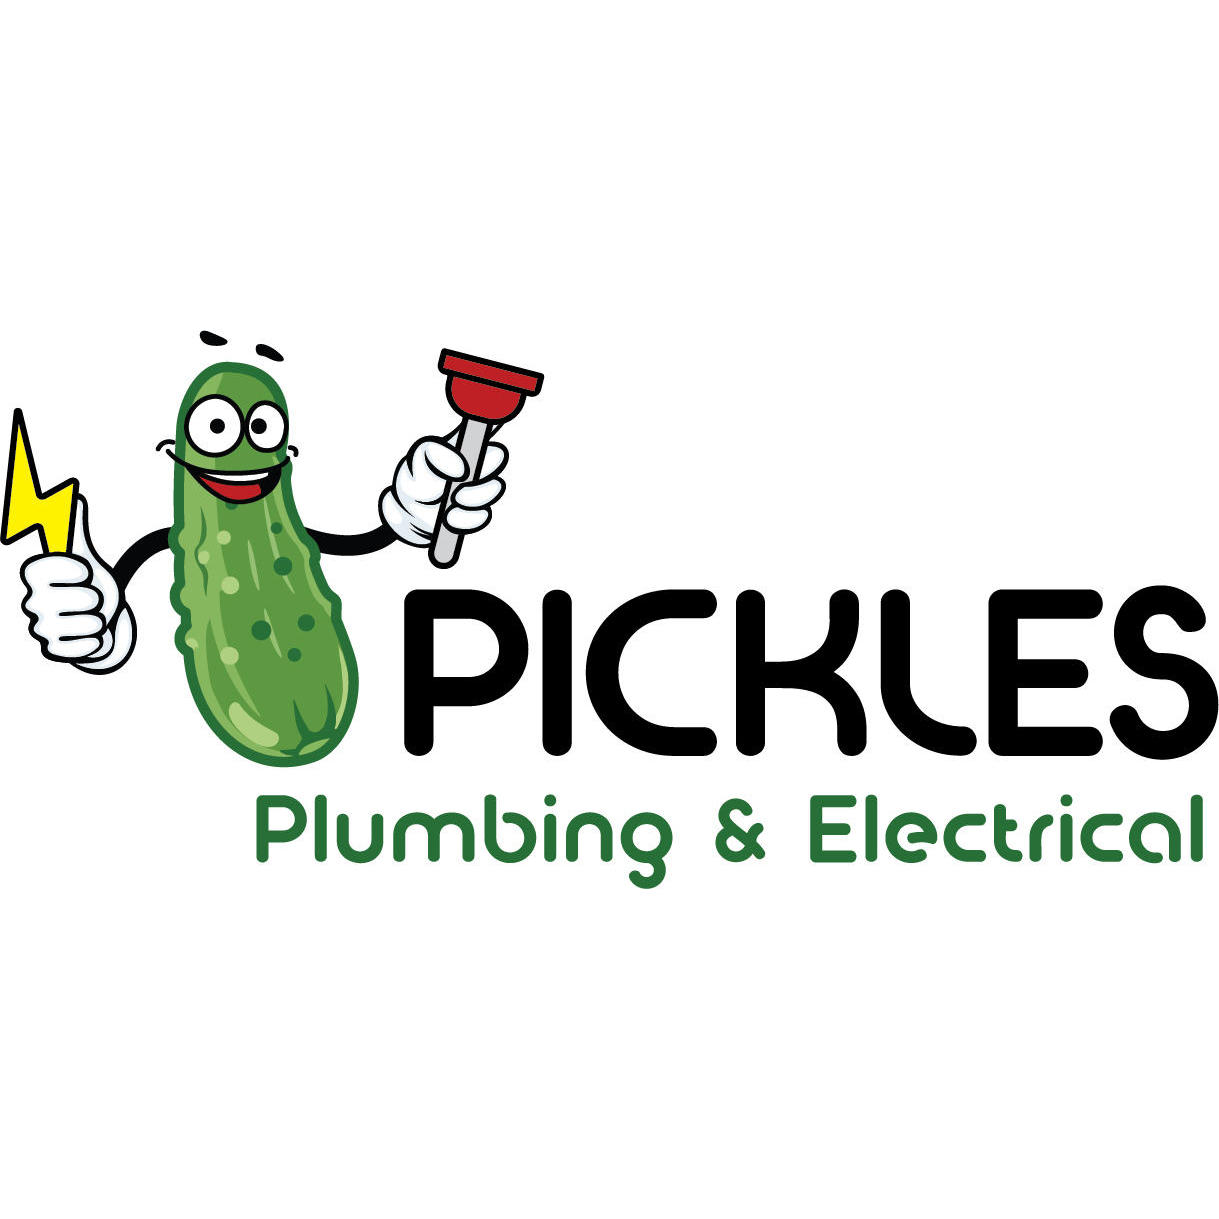 PICKLES PLUMBING AND ELECTRICAL PTY LTD Tanilba Bay 0419 372 131